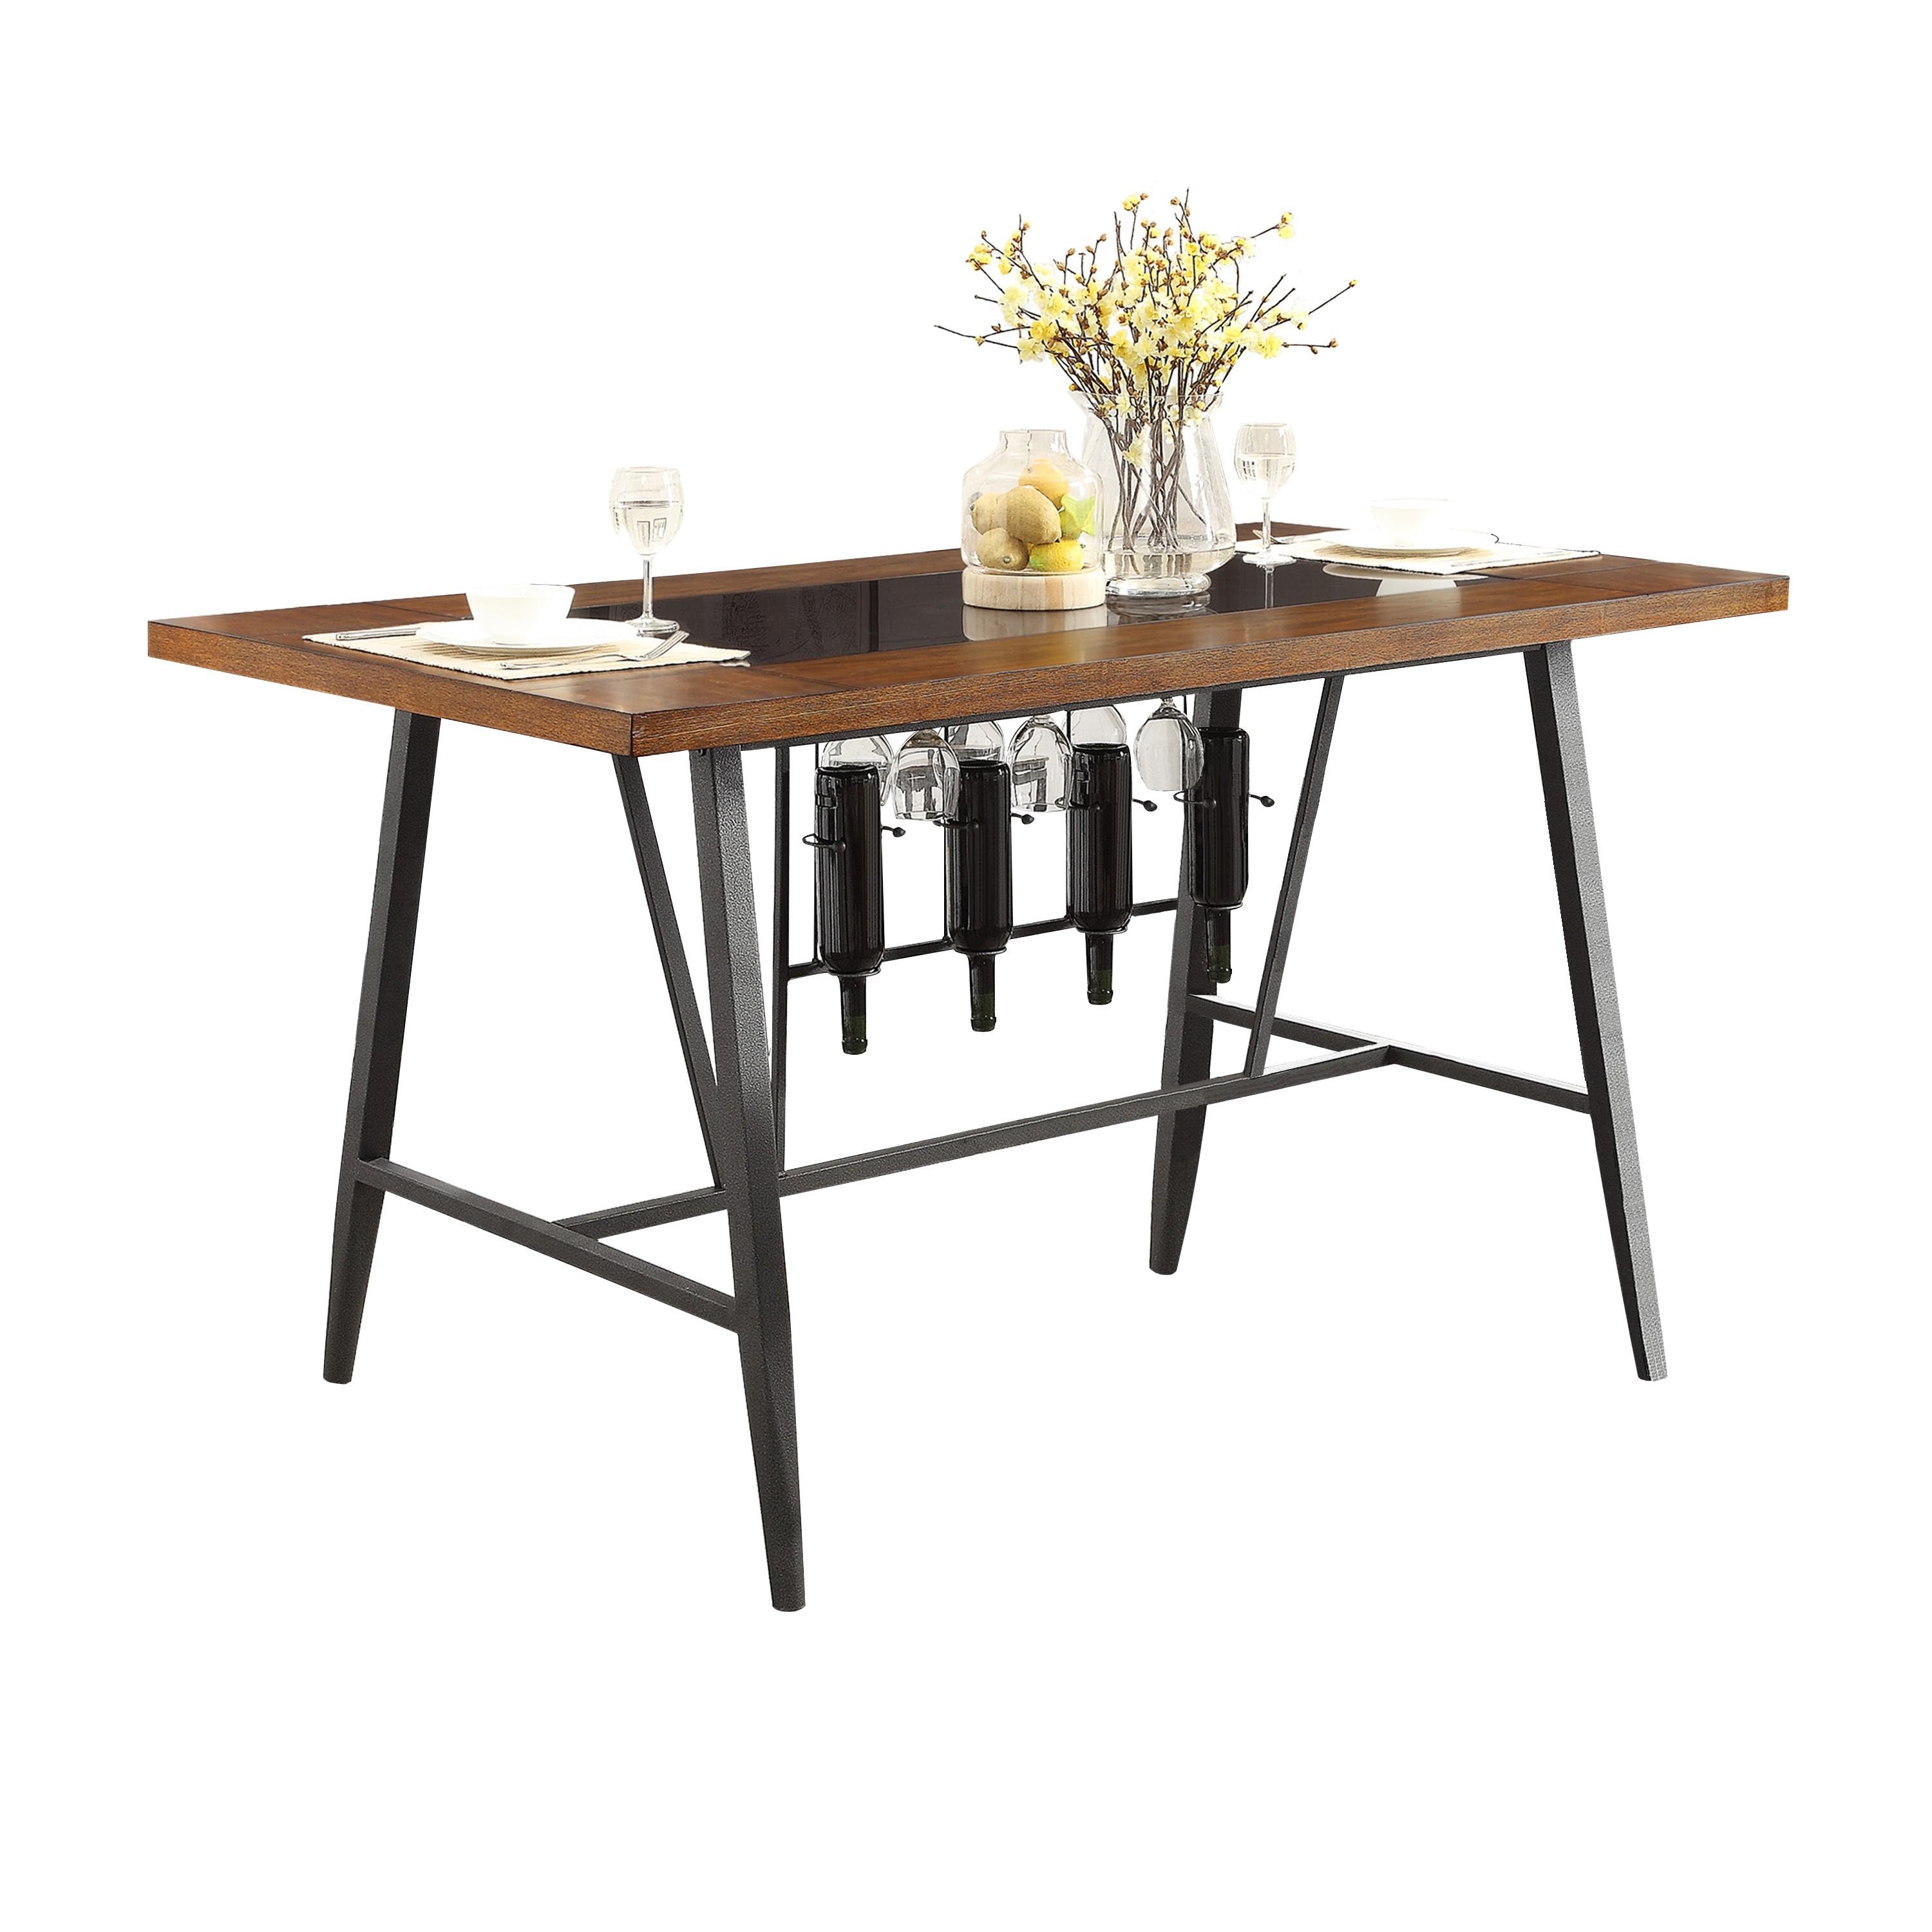 Rustic Counter Height Table 5489-36* Selbyville 5489-36* in Gunmetal, Light Cherry 